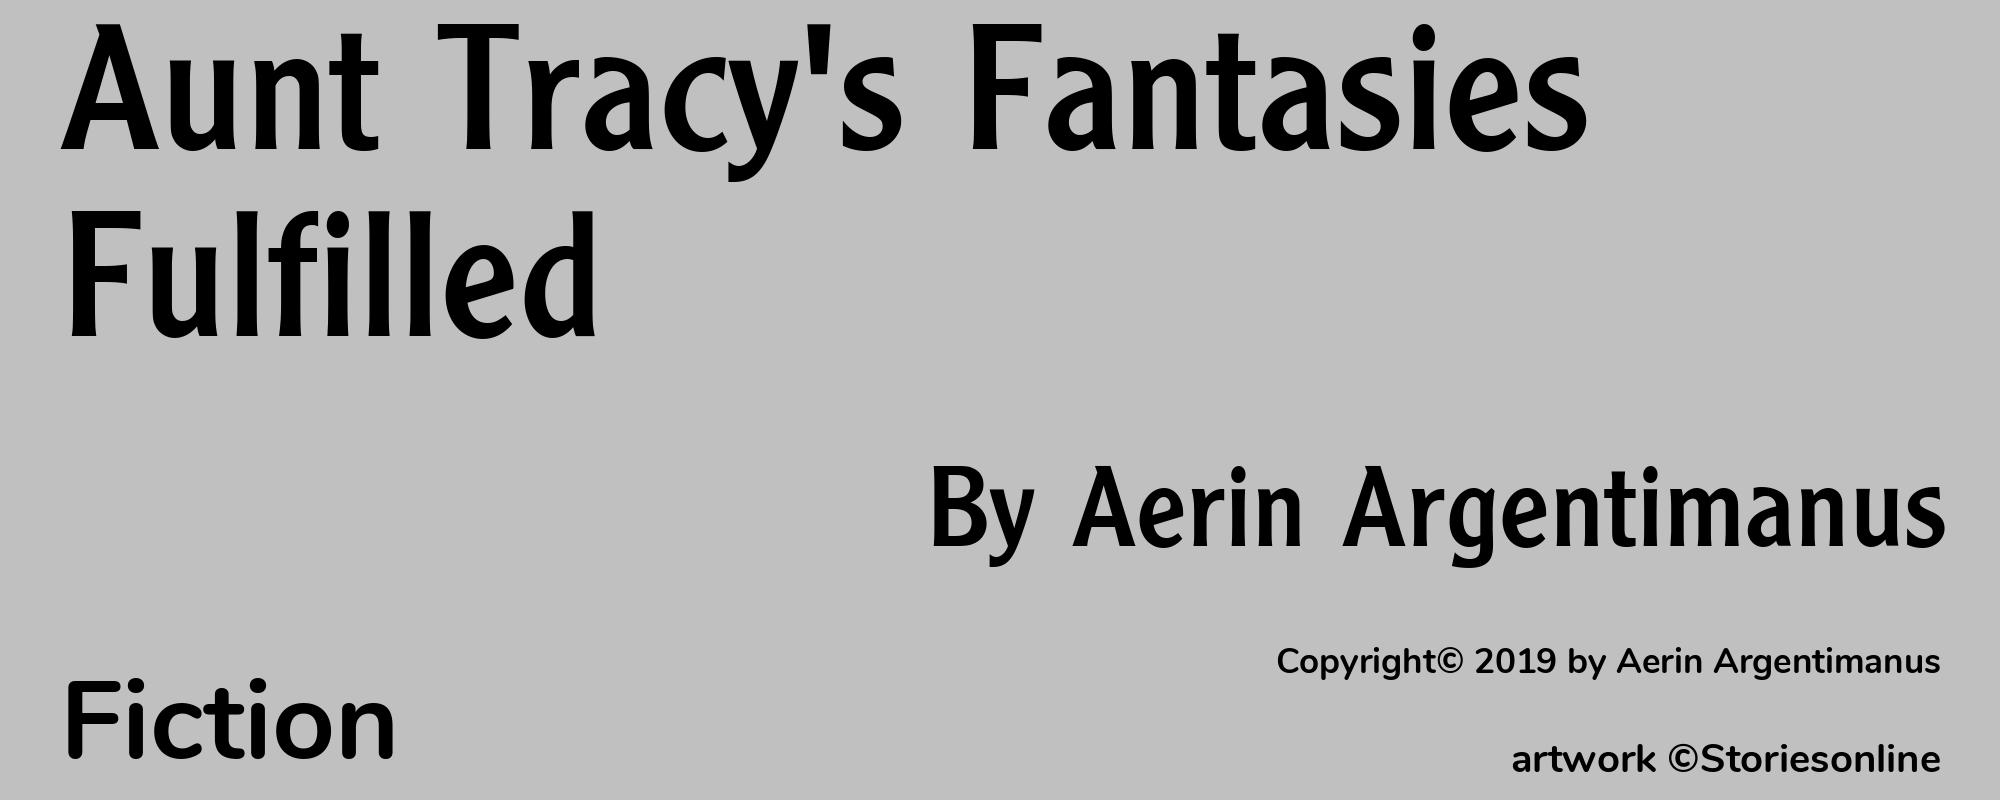 Aunt Tracy's Fantasies Fulfilled - Cover